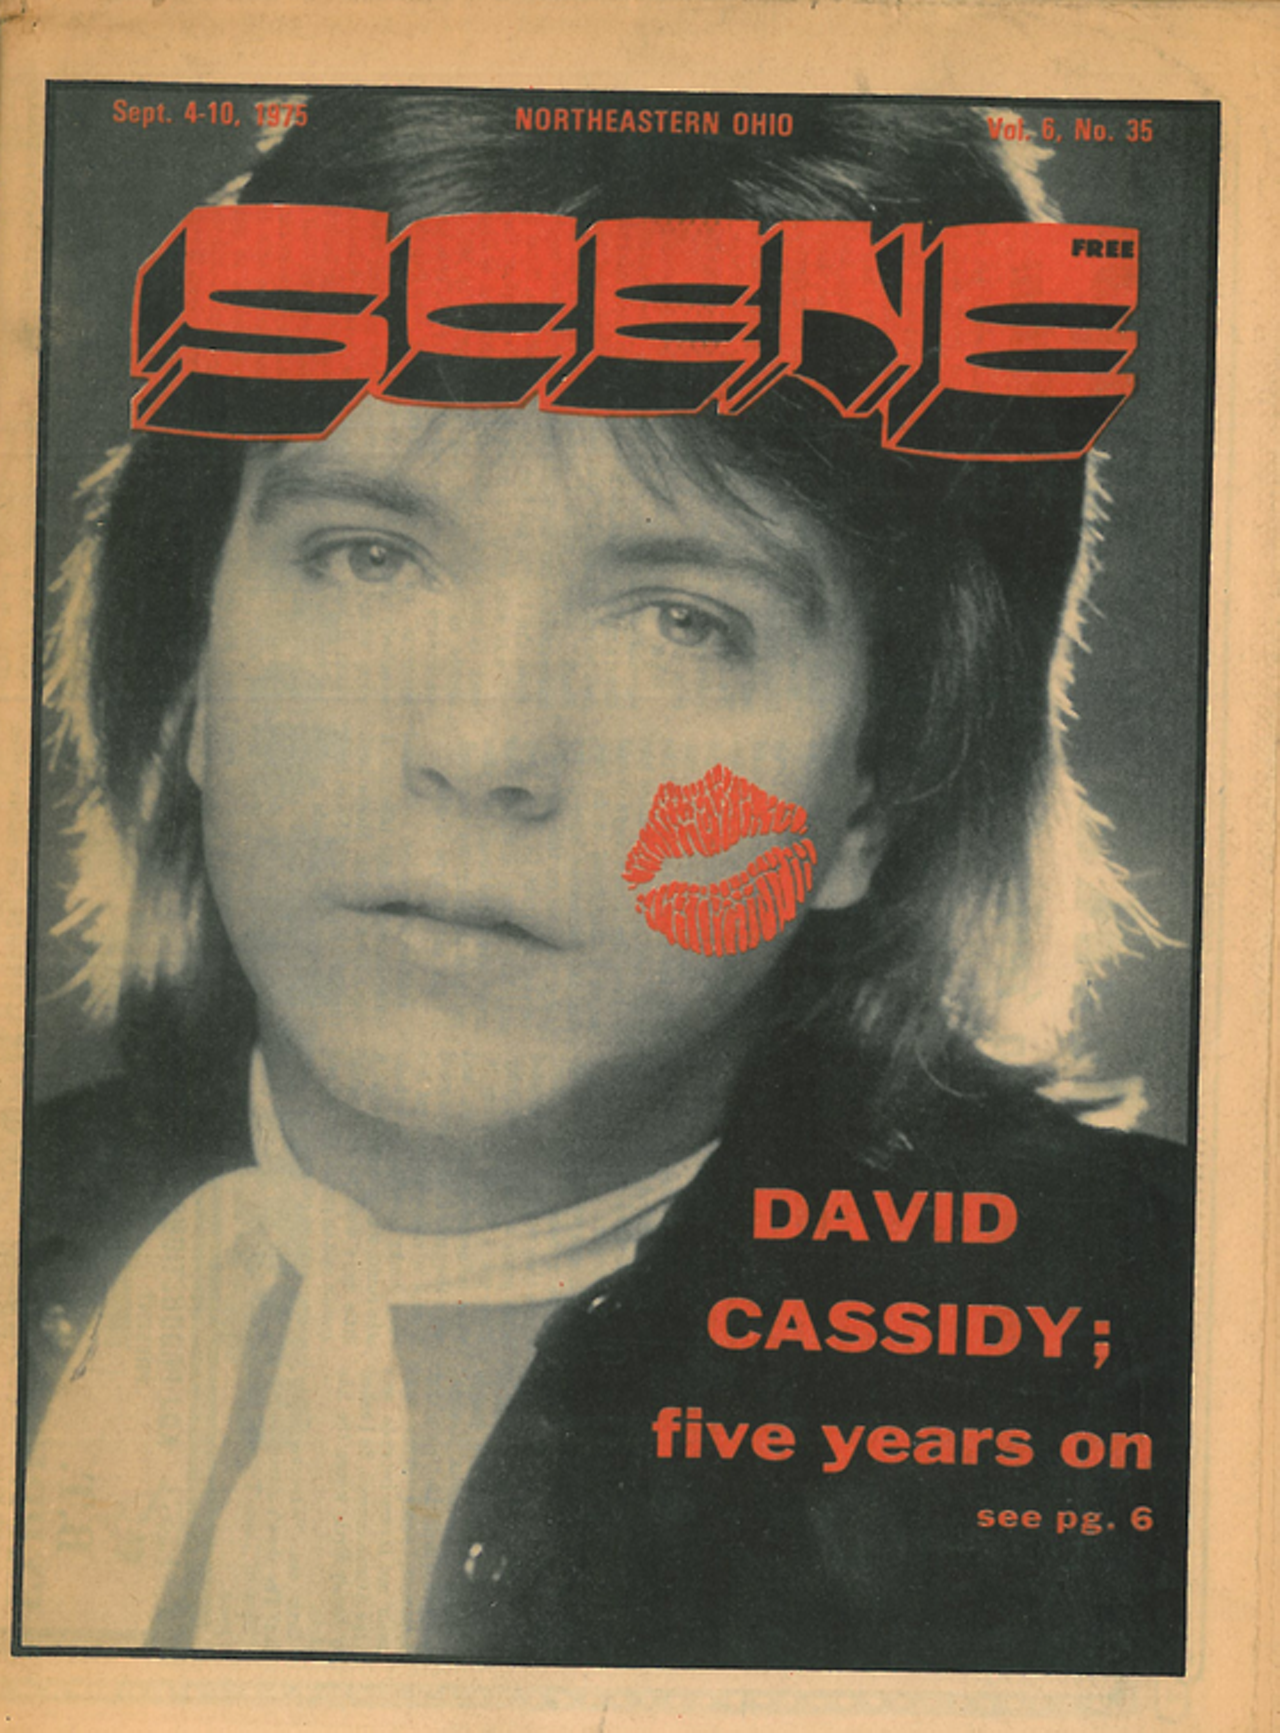 "David Cassidy; five years on," 1975.